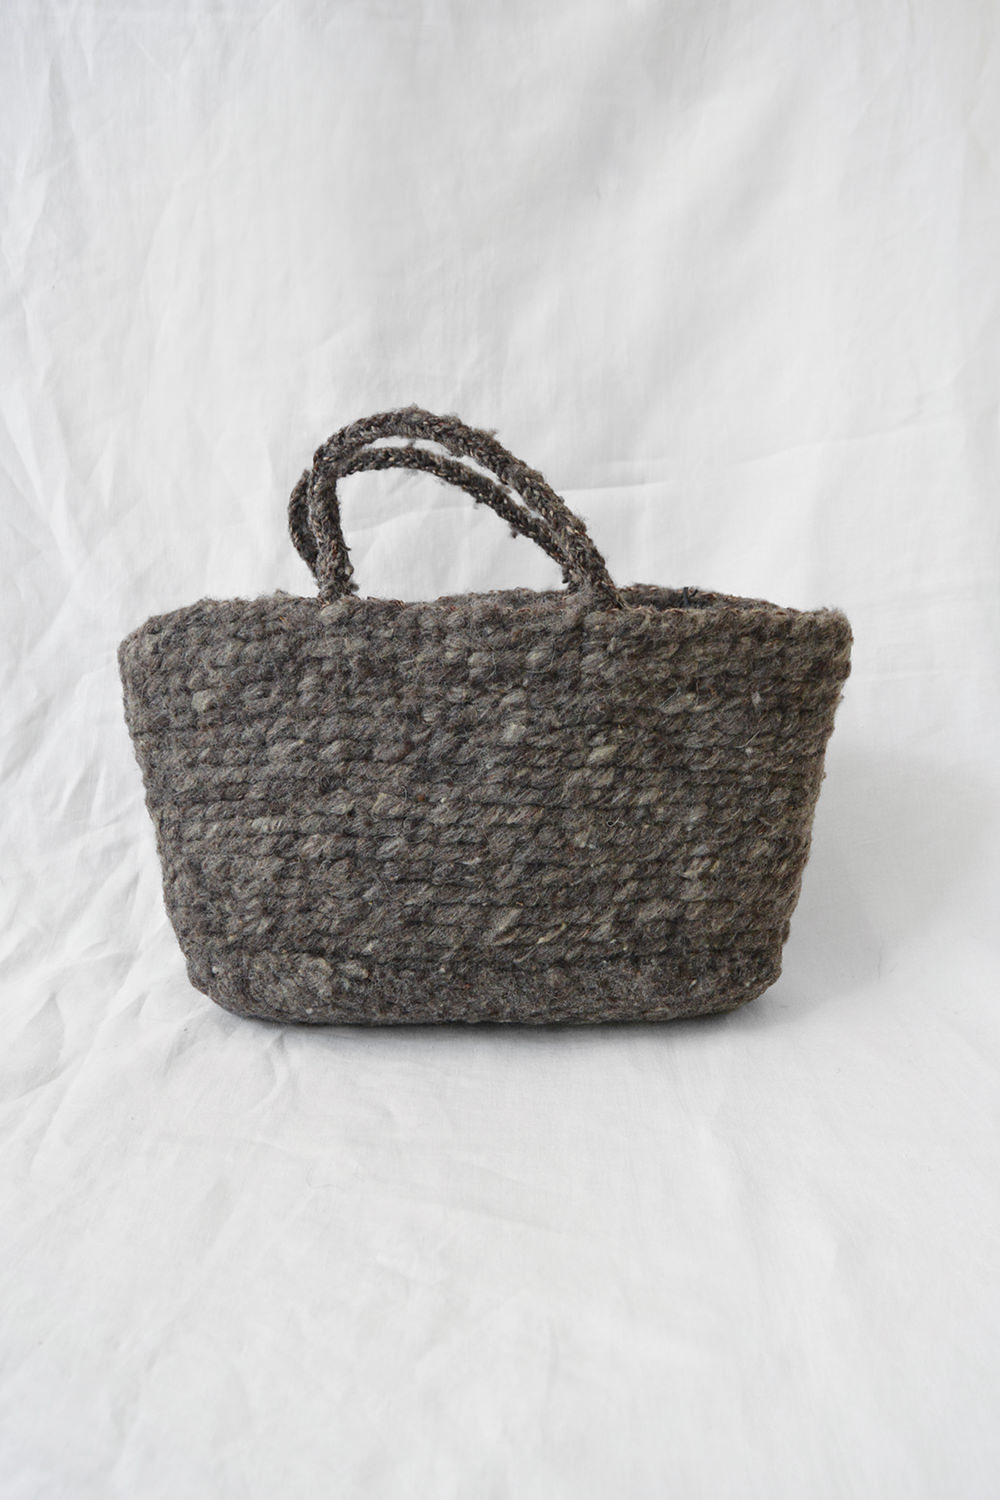 Sophie Digard Paris / ソフィー・ディガール, Carded Wool Bag S139